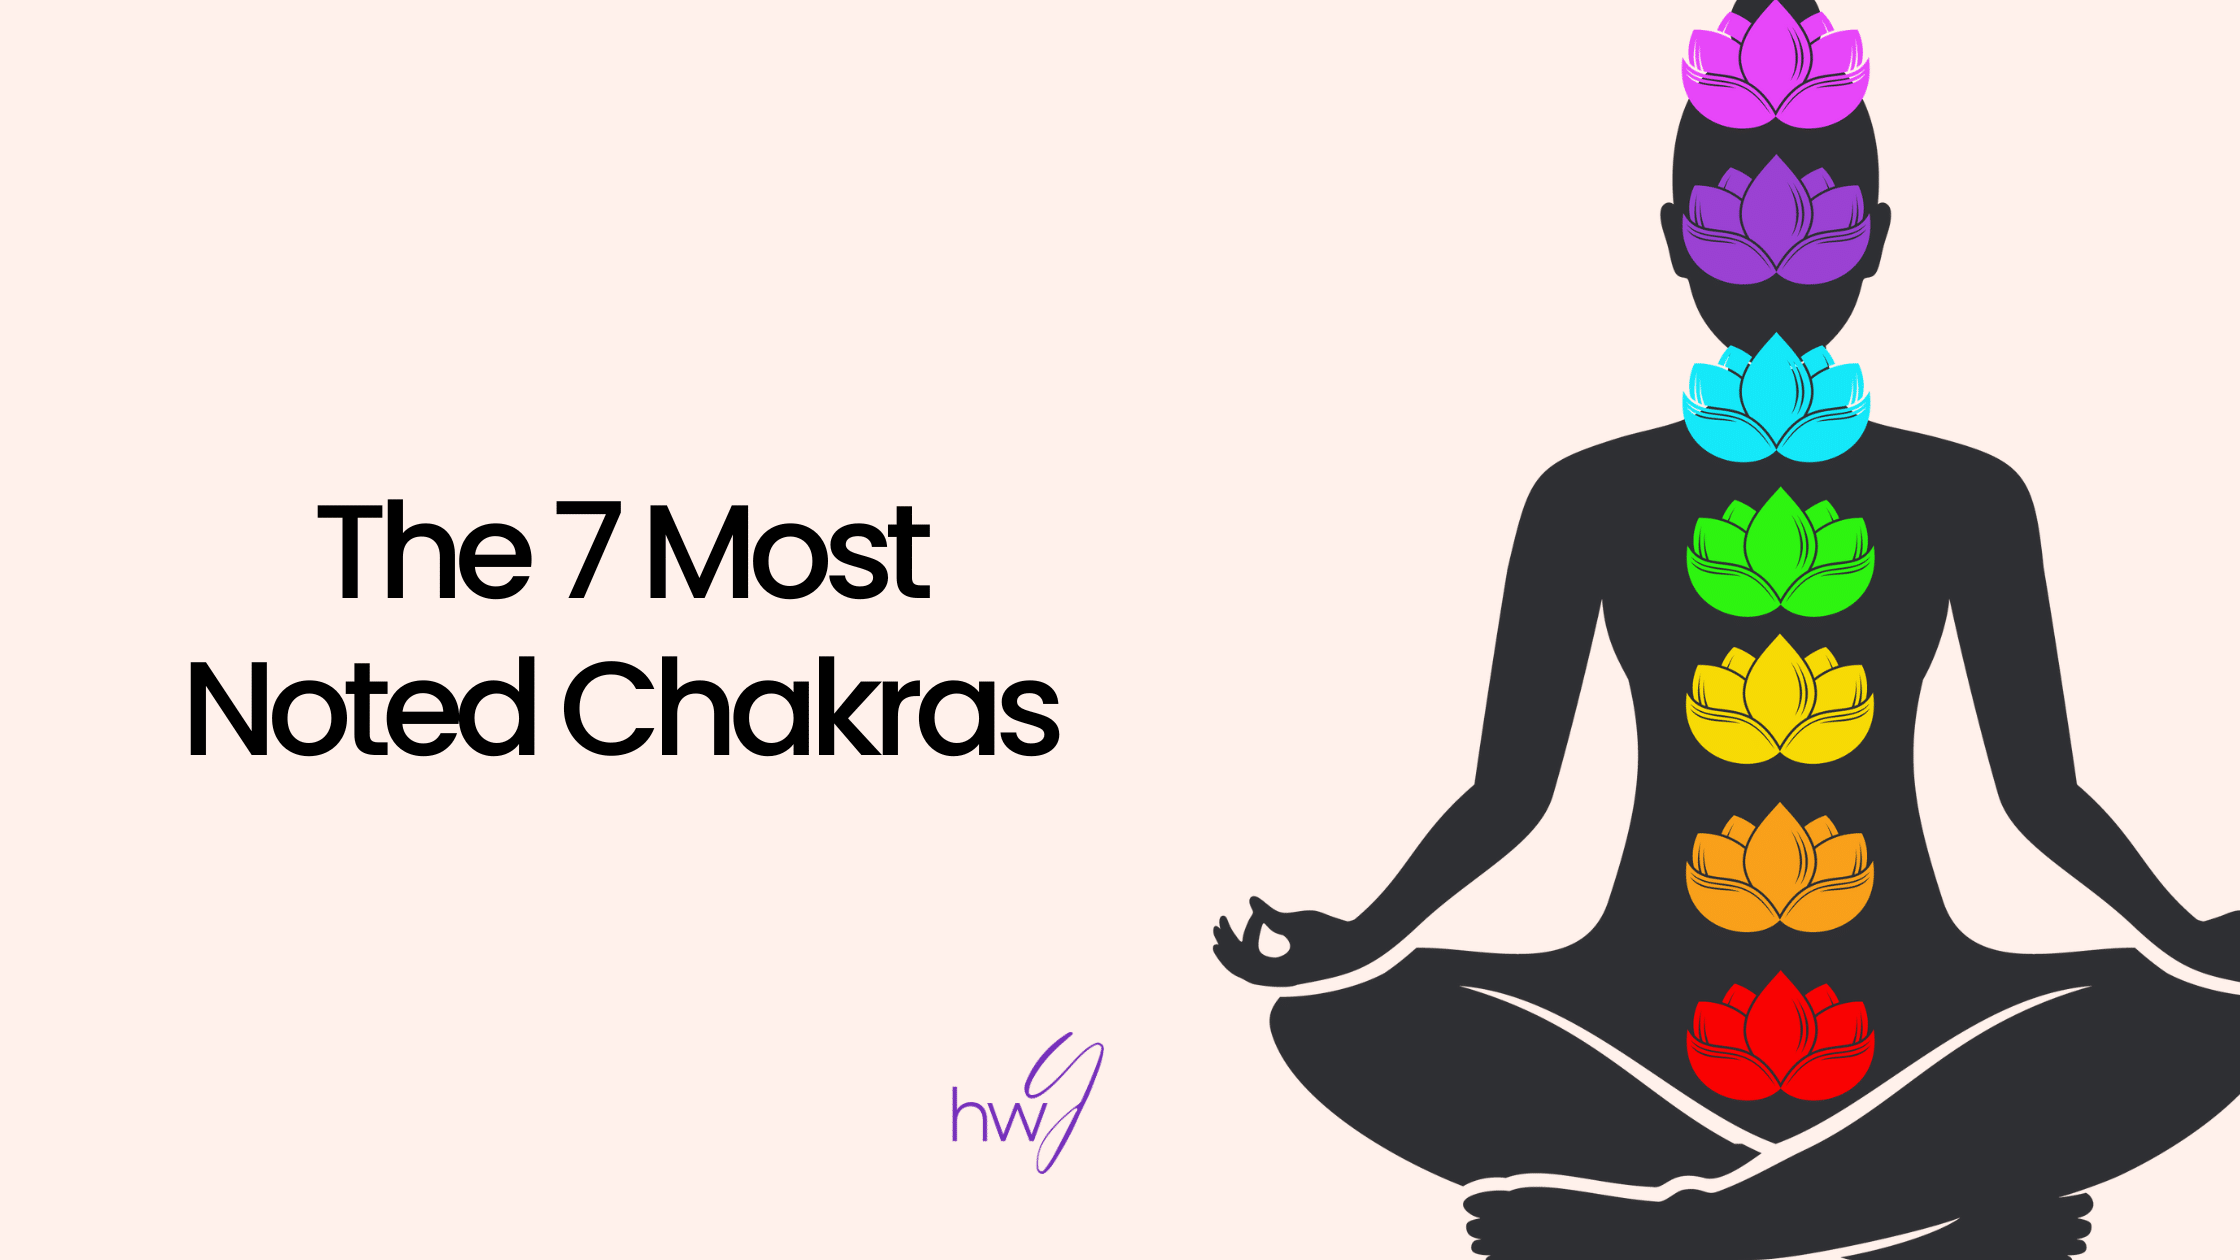 The 7 Most Noted Chakras